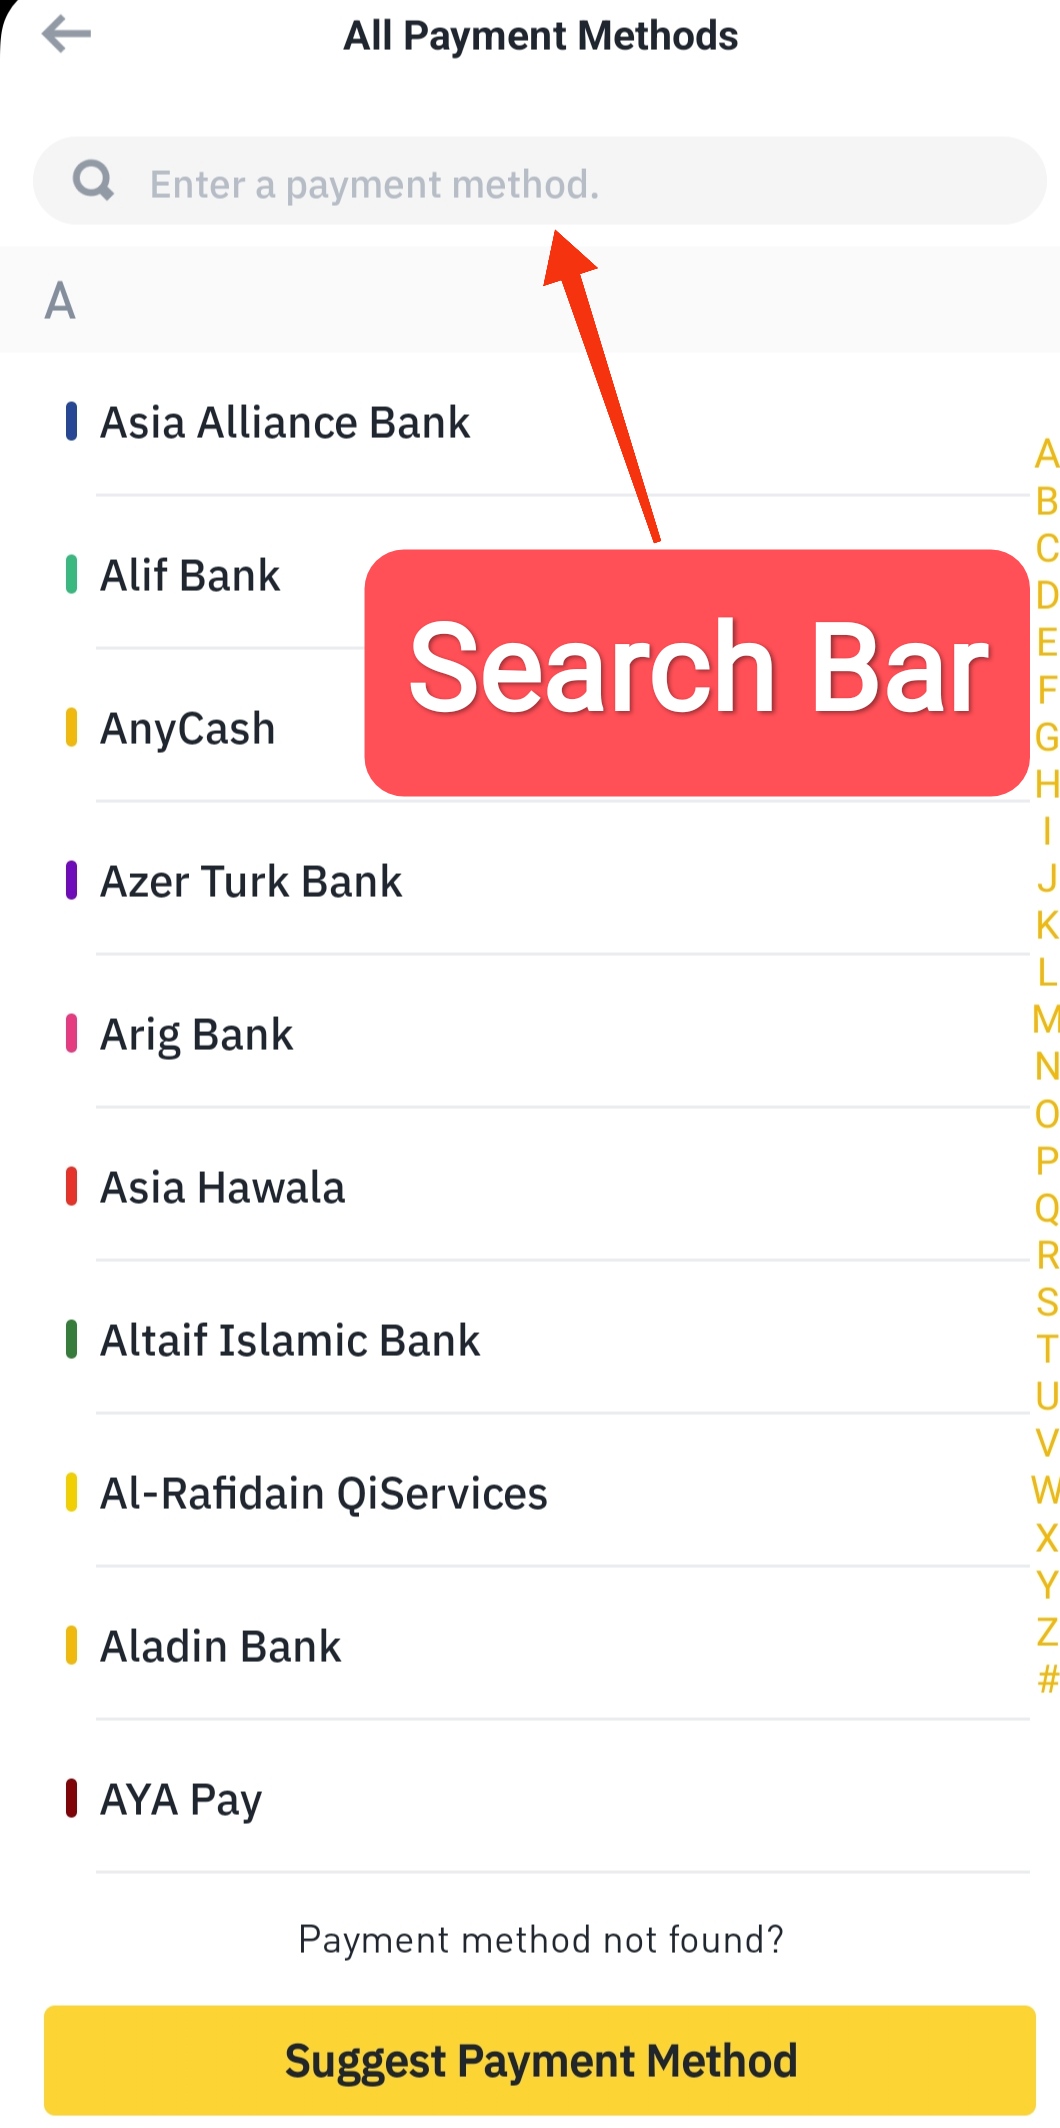 After that you can also add by searching your desired bank account in the search bar. Or you can also find and add Mainully.